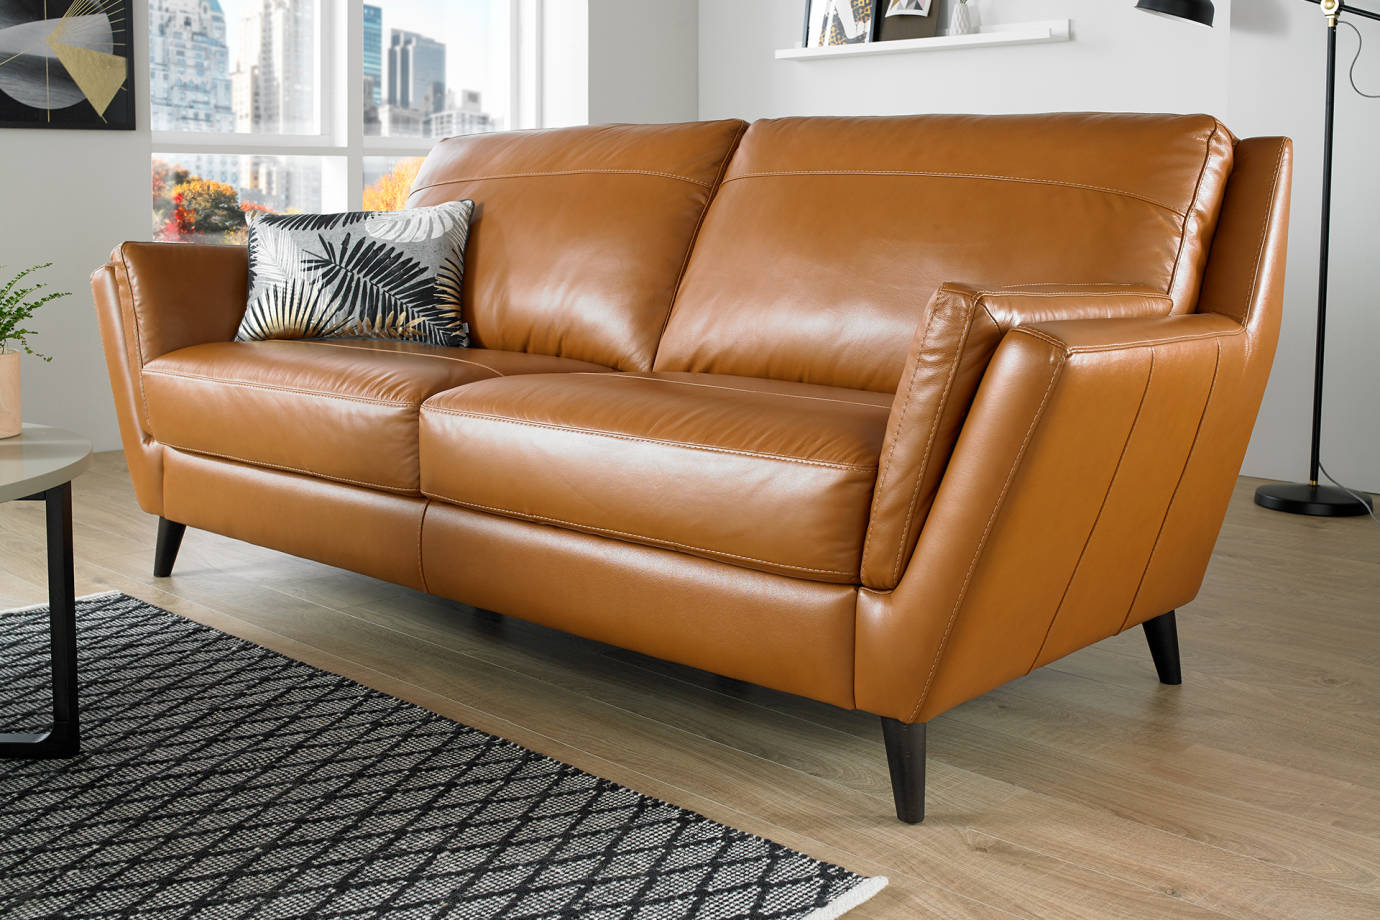 Leather Sofas Sofology, Best Quality Leather Sofas Brands Uk